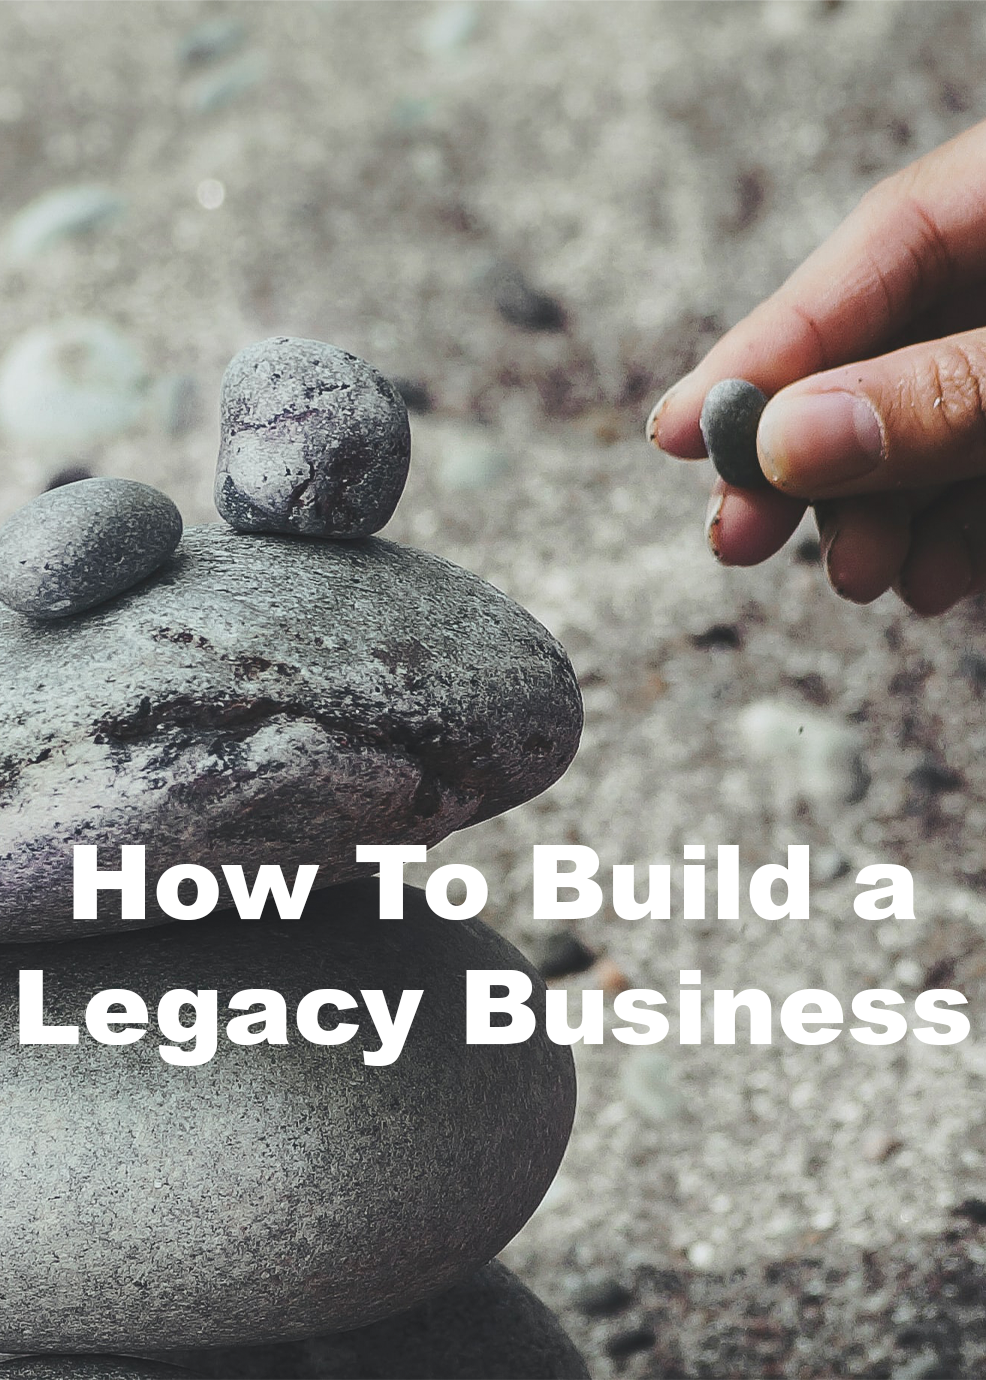 How To Build a Legacy Business